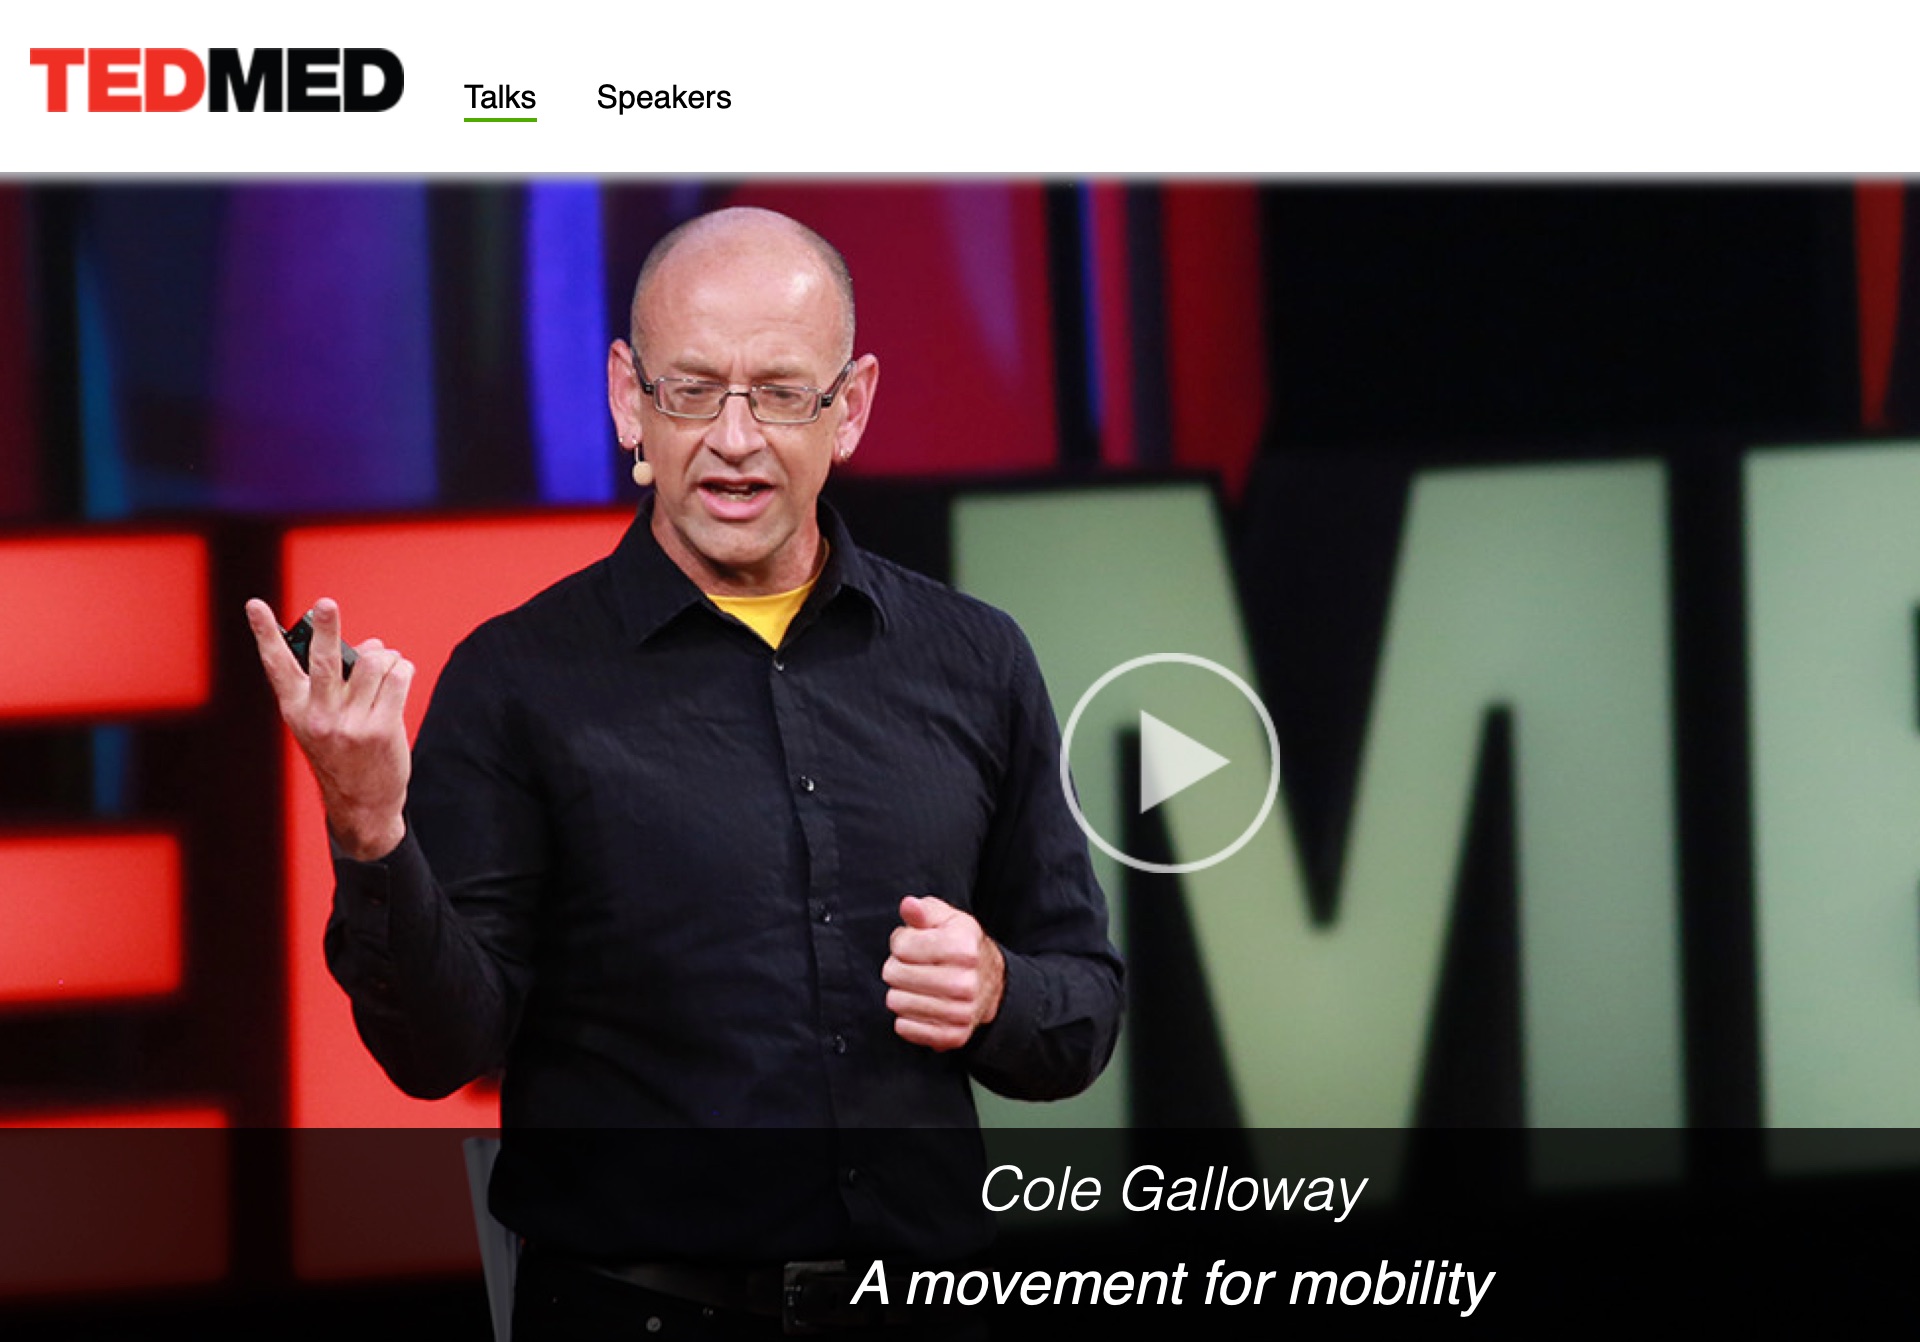 Thumbnail of a TedMed talk showing a teak-skinned bald man in his late forties paused on-stage mid-talk.